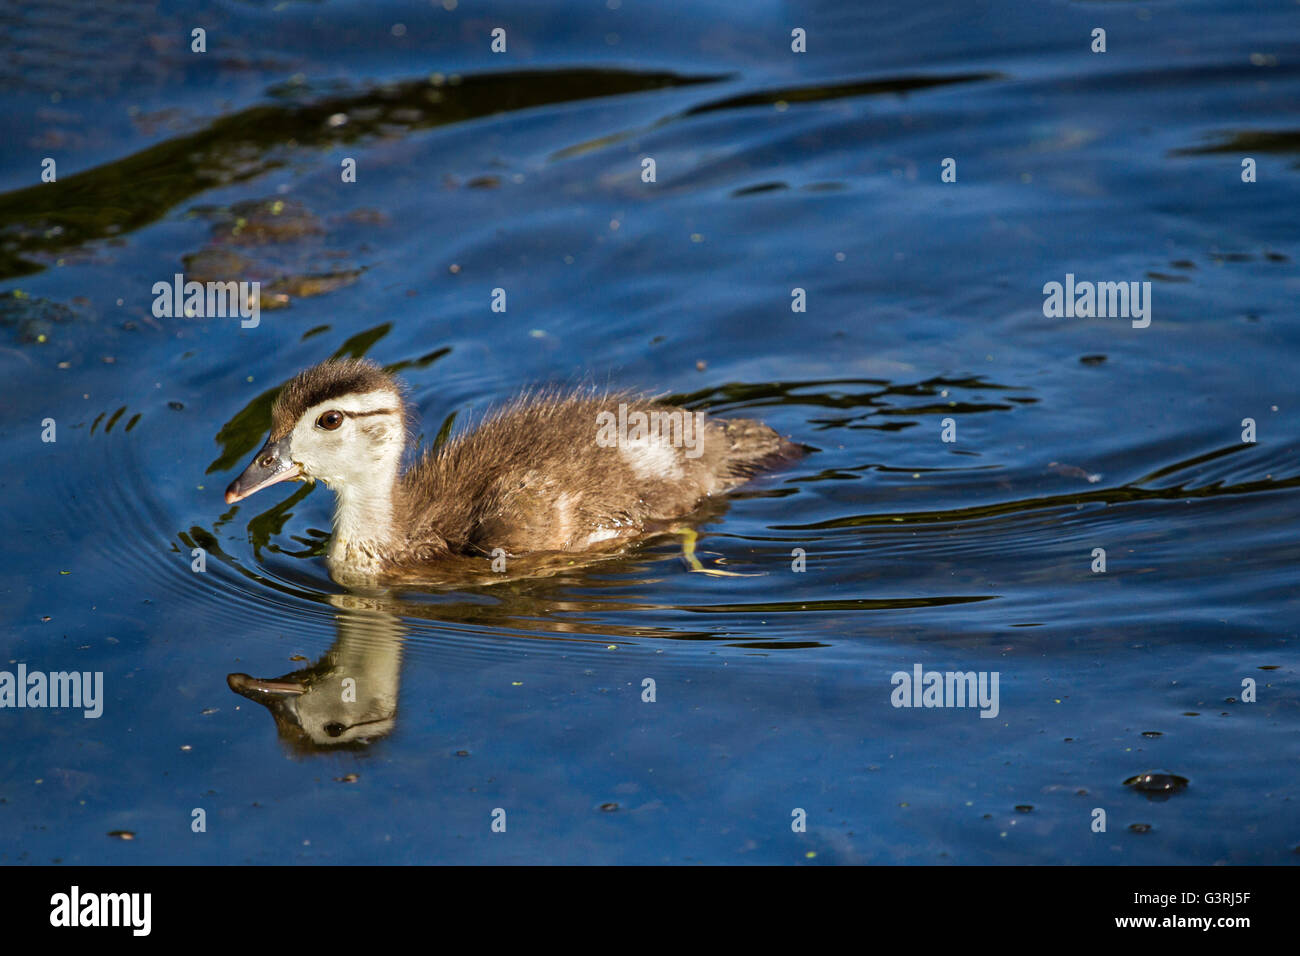 Young baby Wood Duck floating in lake Stock Photo